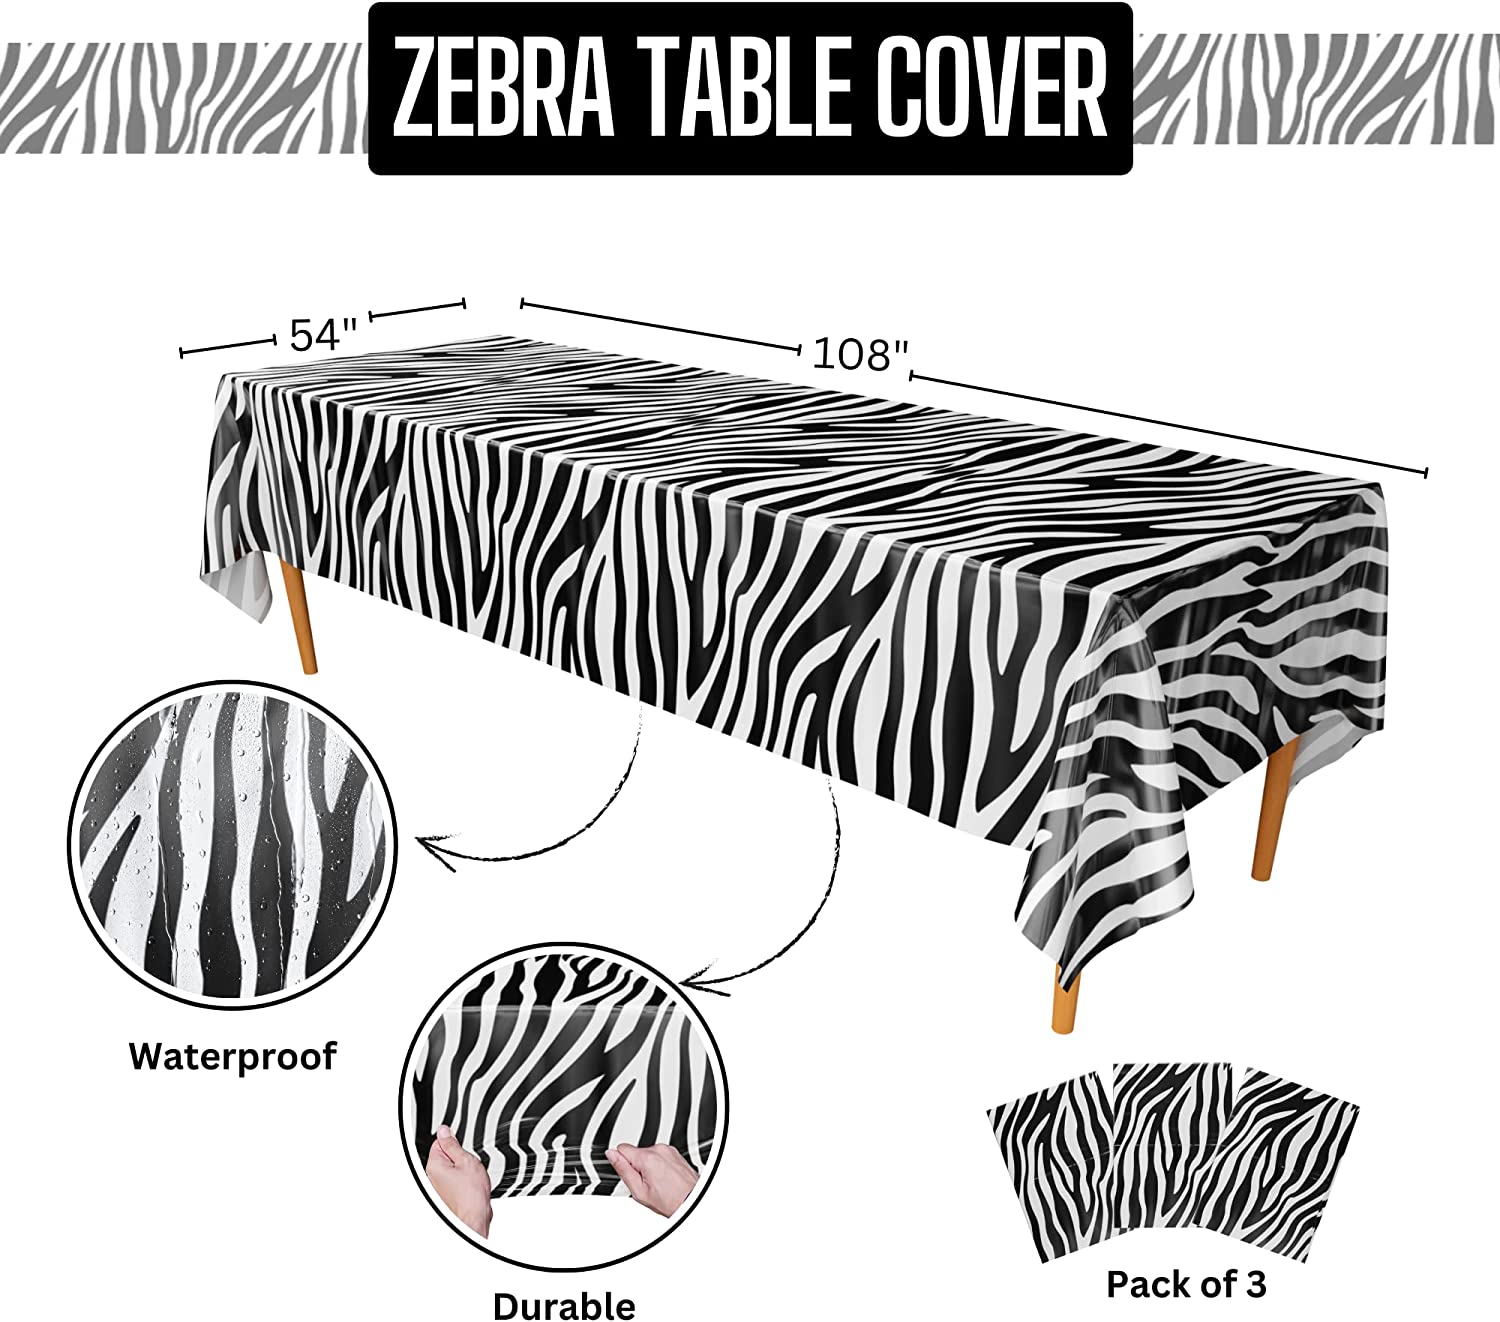 Waterproof and Durable Zebra Table Covers are a perfect complement to your birthday party decorations and will make your table settings stand out!